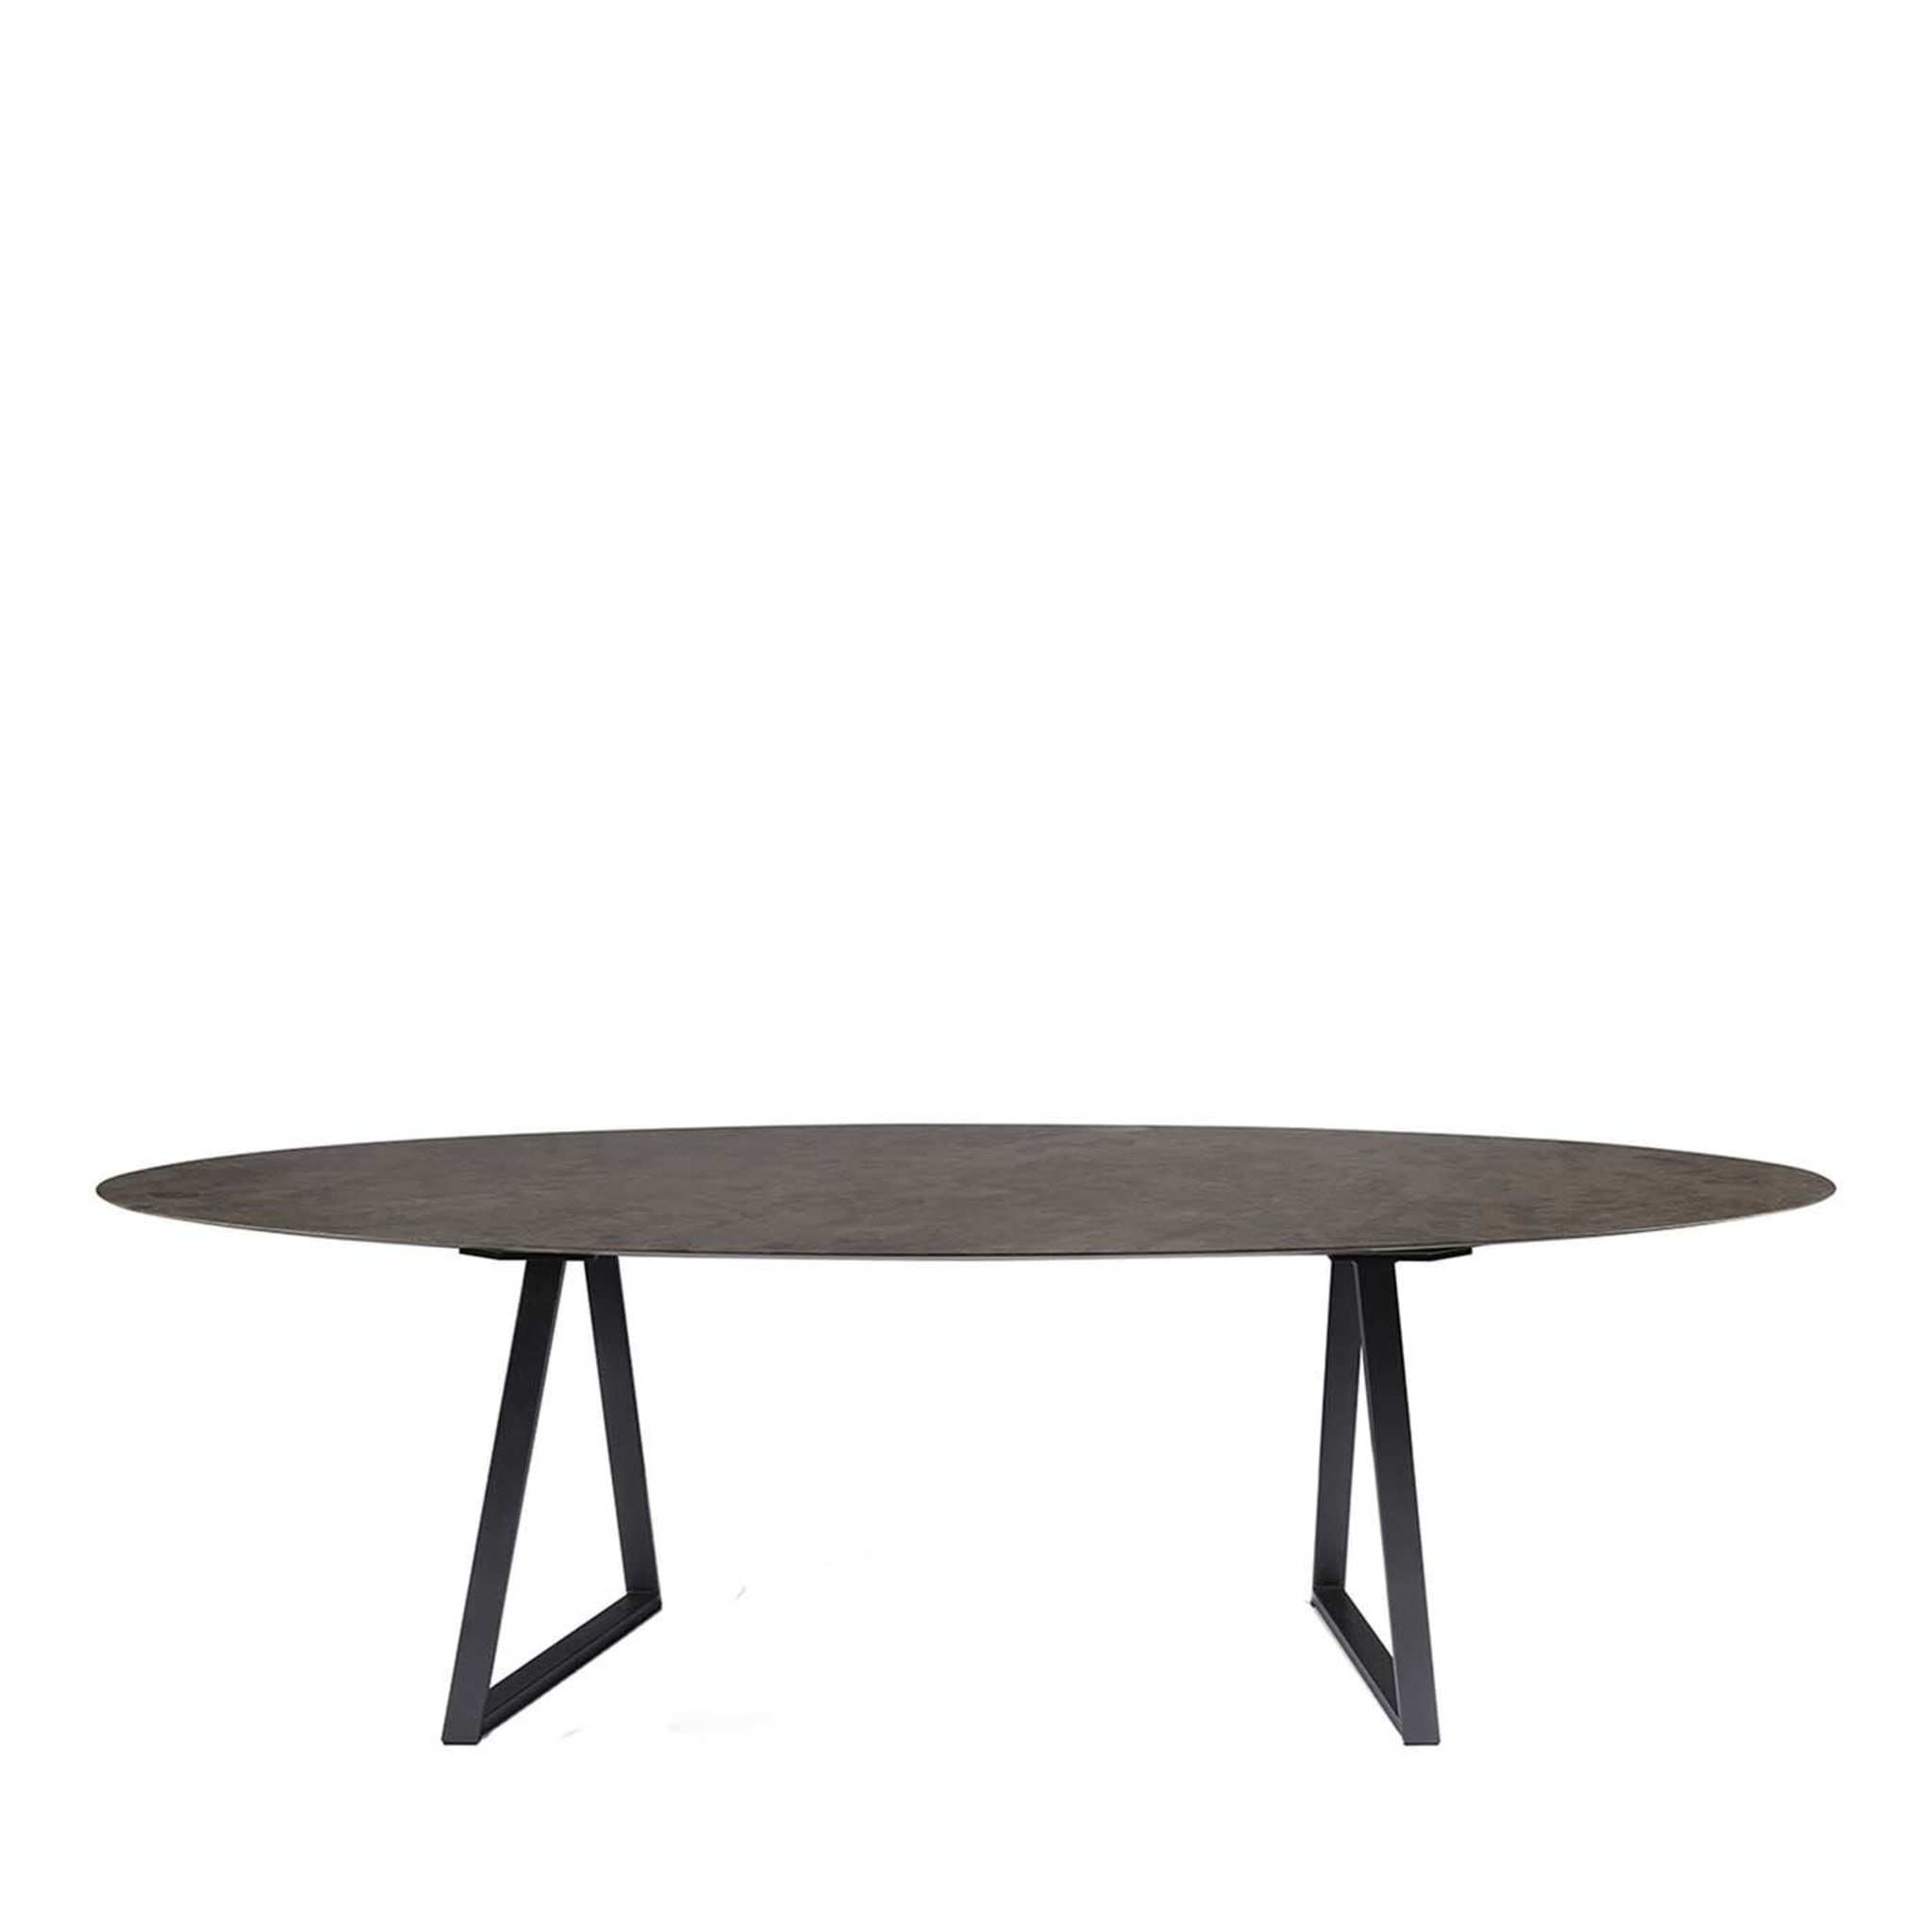 Dritto Oval Dining Table by Piero Lissoni - Main view